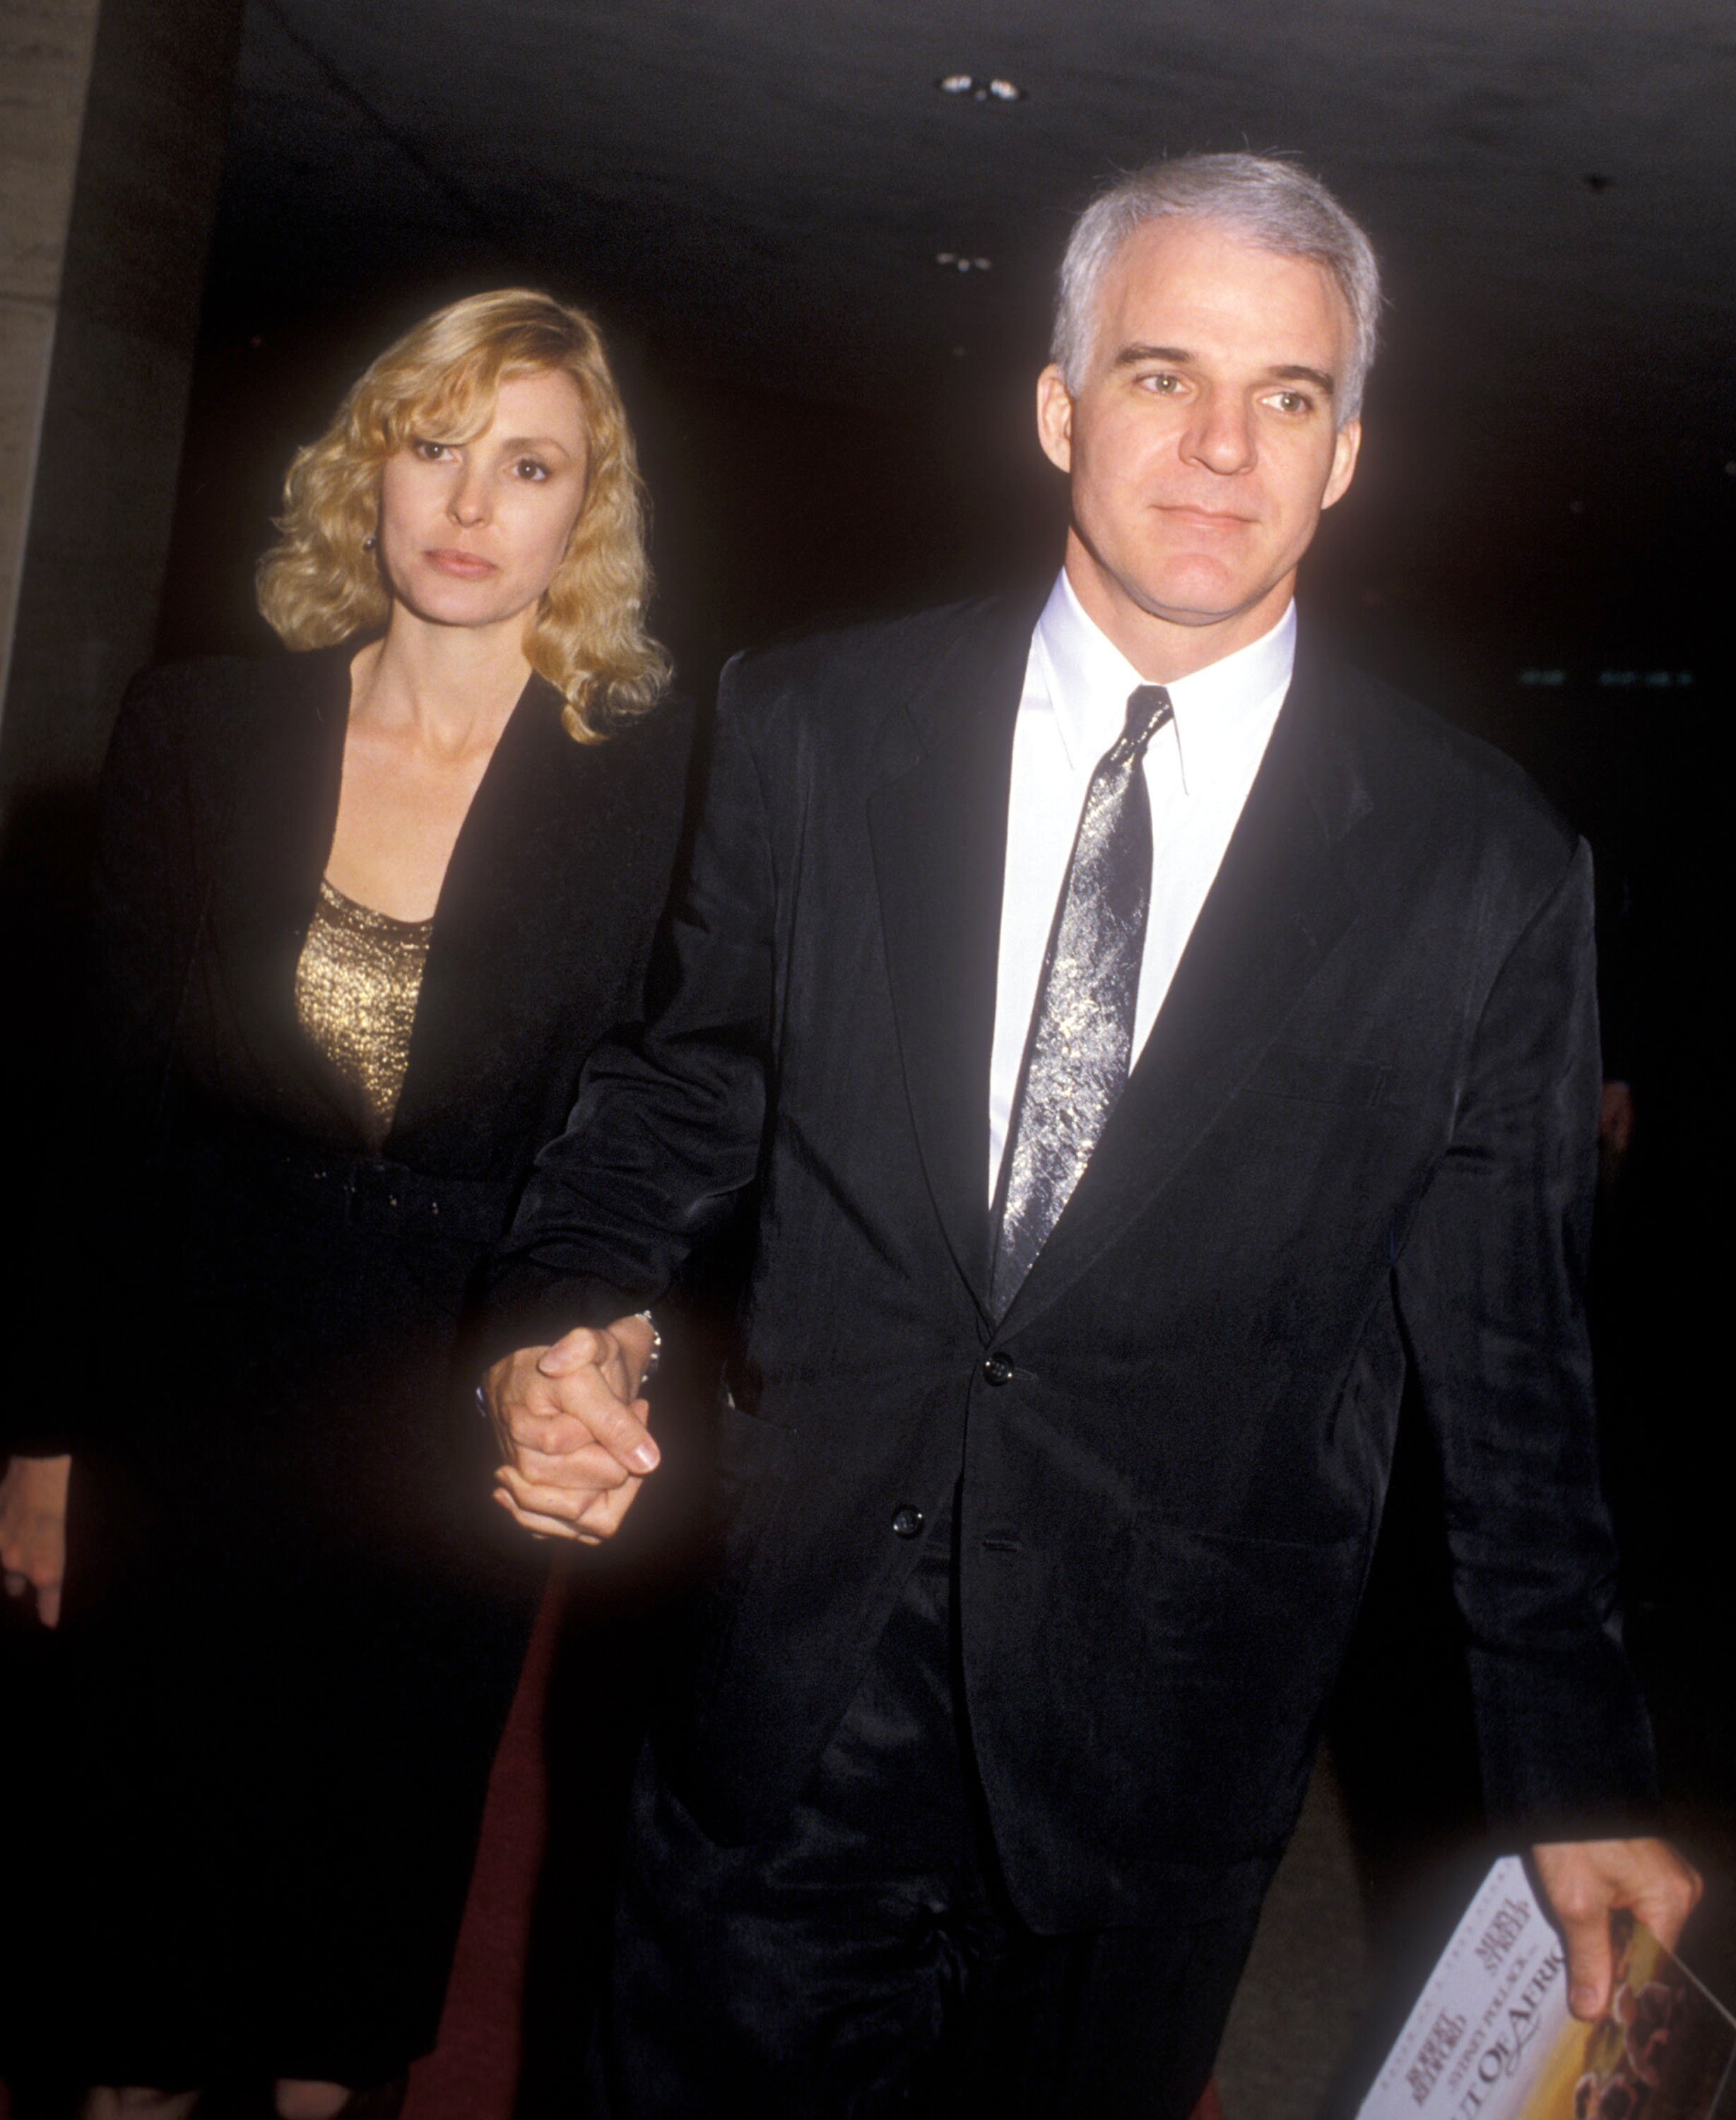 Victoria Tennant and Steve Martin during "Out Of Africa" Los Angeles premiere in Century City, California, on December 10, 1985 | Source: Getty Images